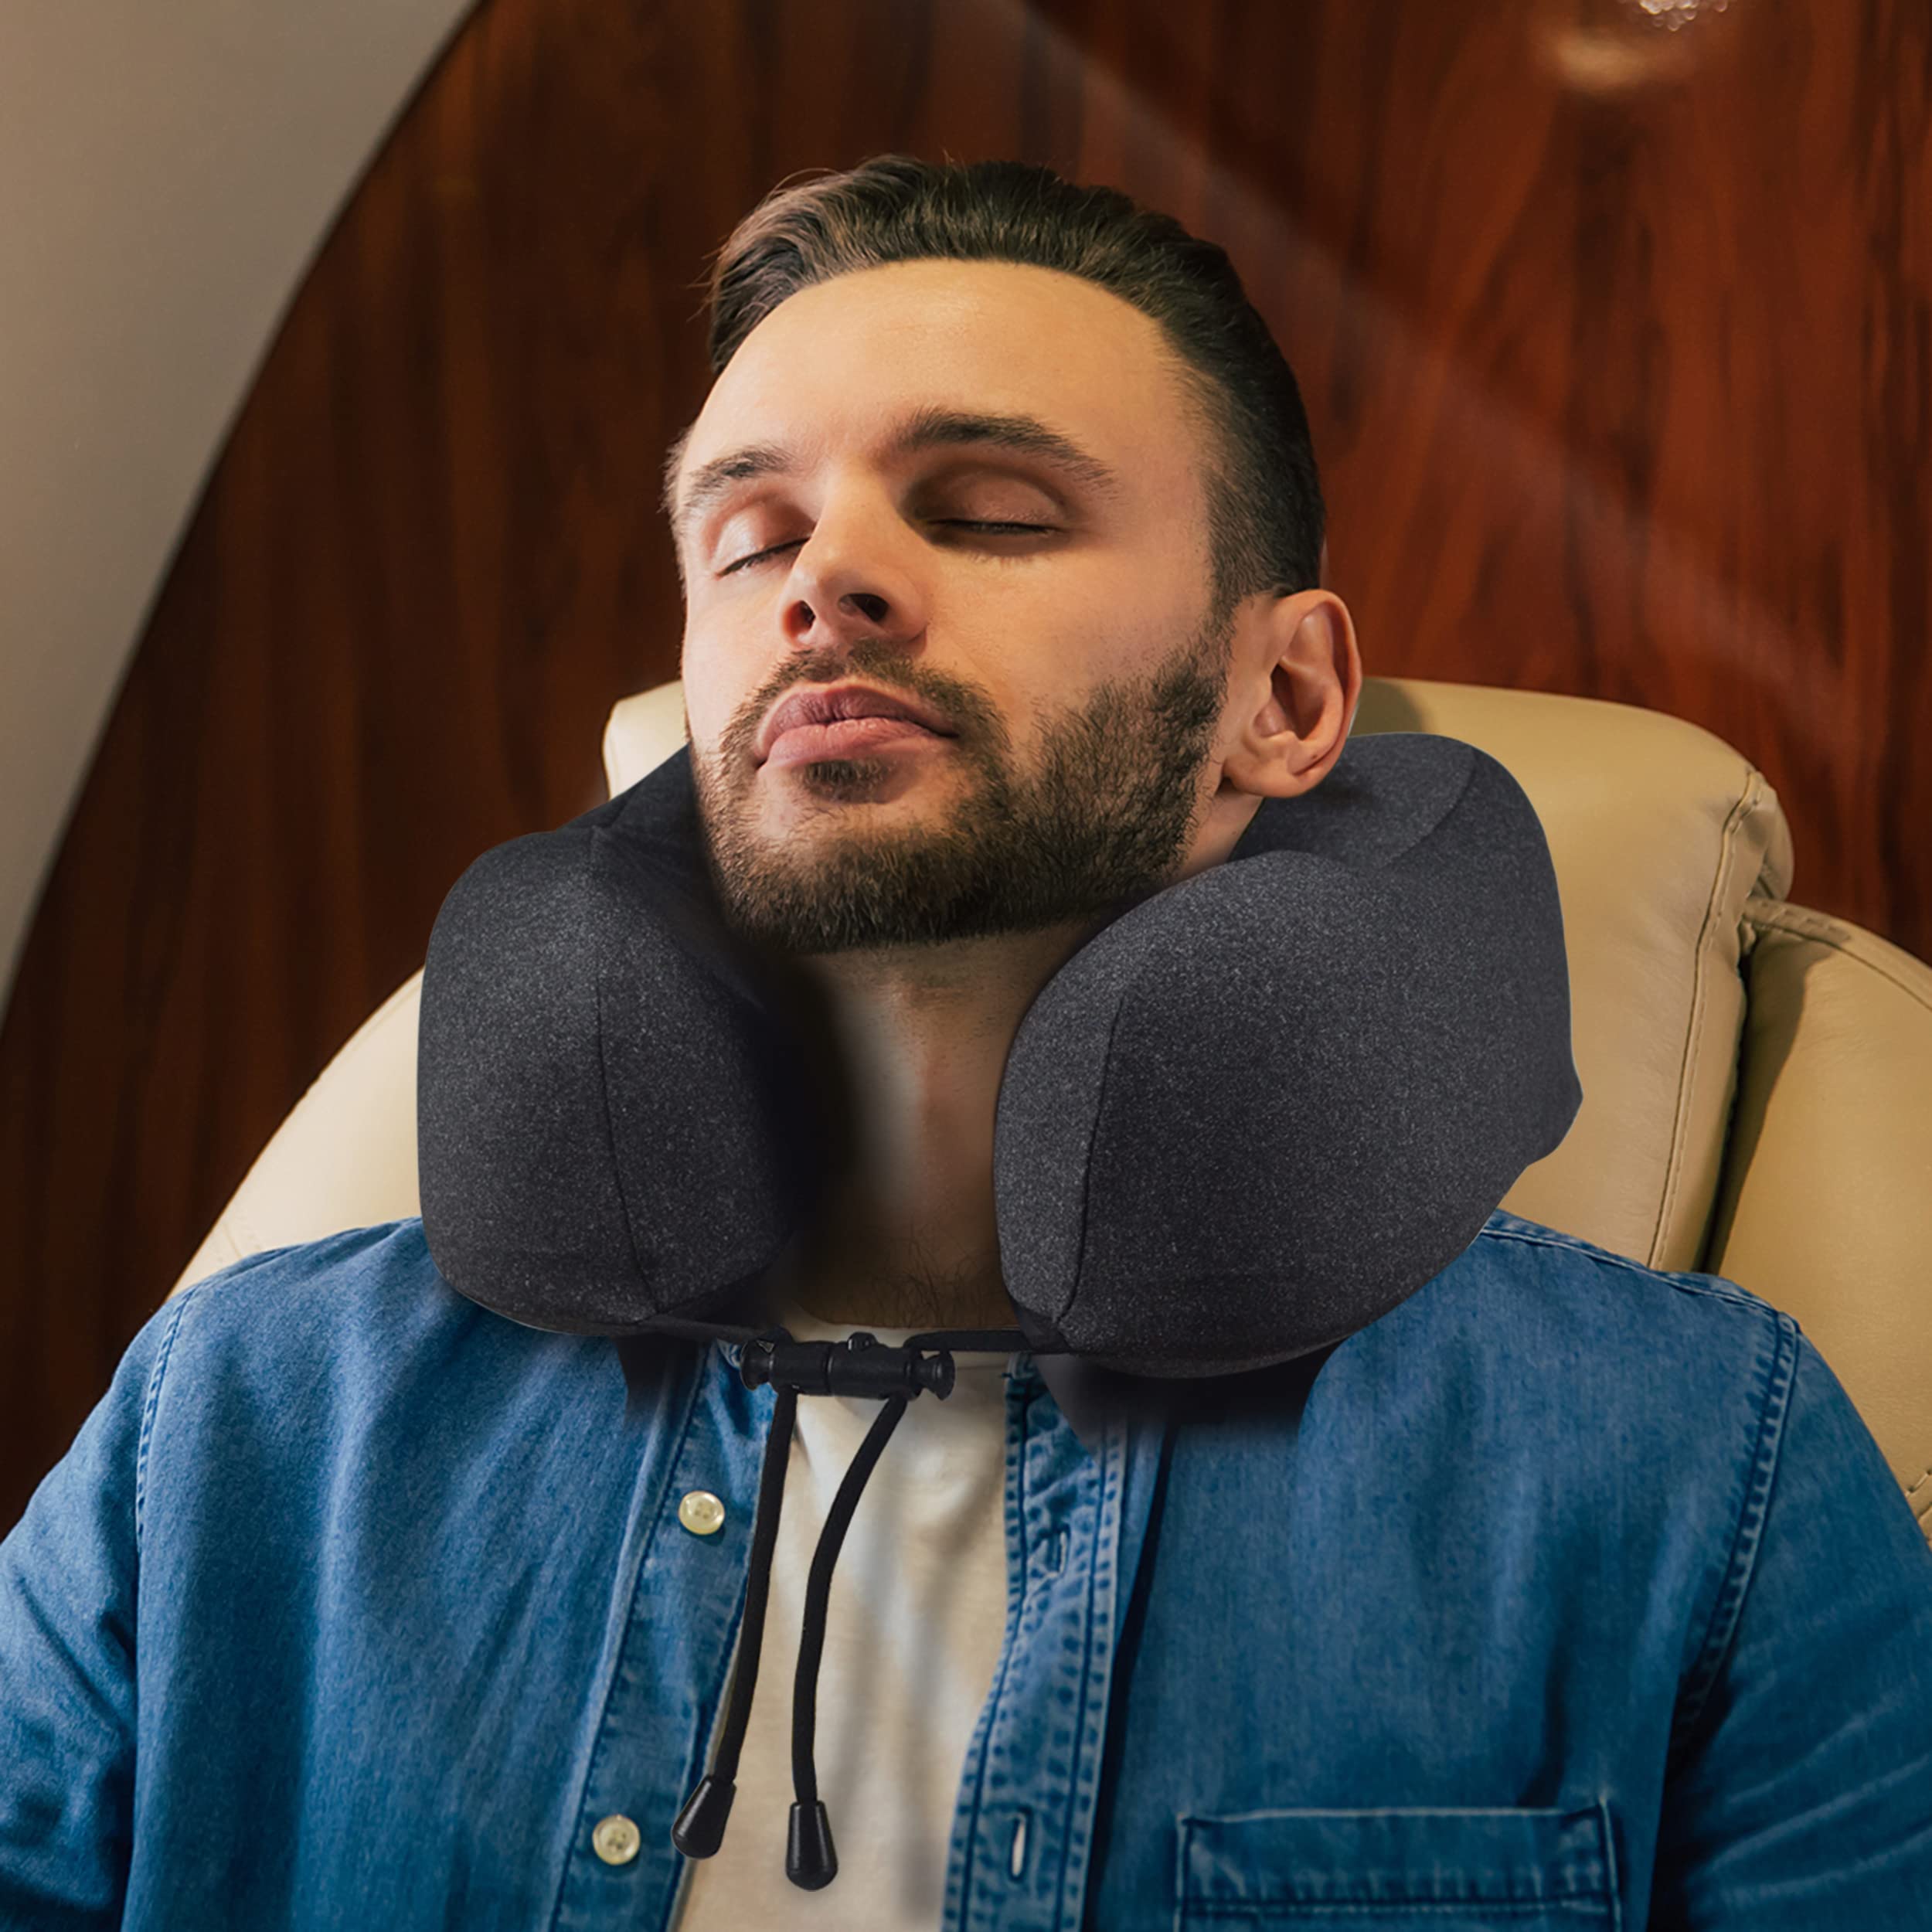 napfun Travel Pillow, Travel Accessories & Travel Essentials for Airplane Upgraded 100% Pure Memory Foam Travel Neck Pillow for Flight Headrest Sleep, Portable Plane Necessities, Full Black